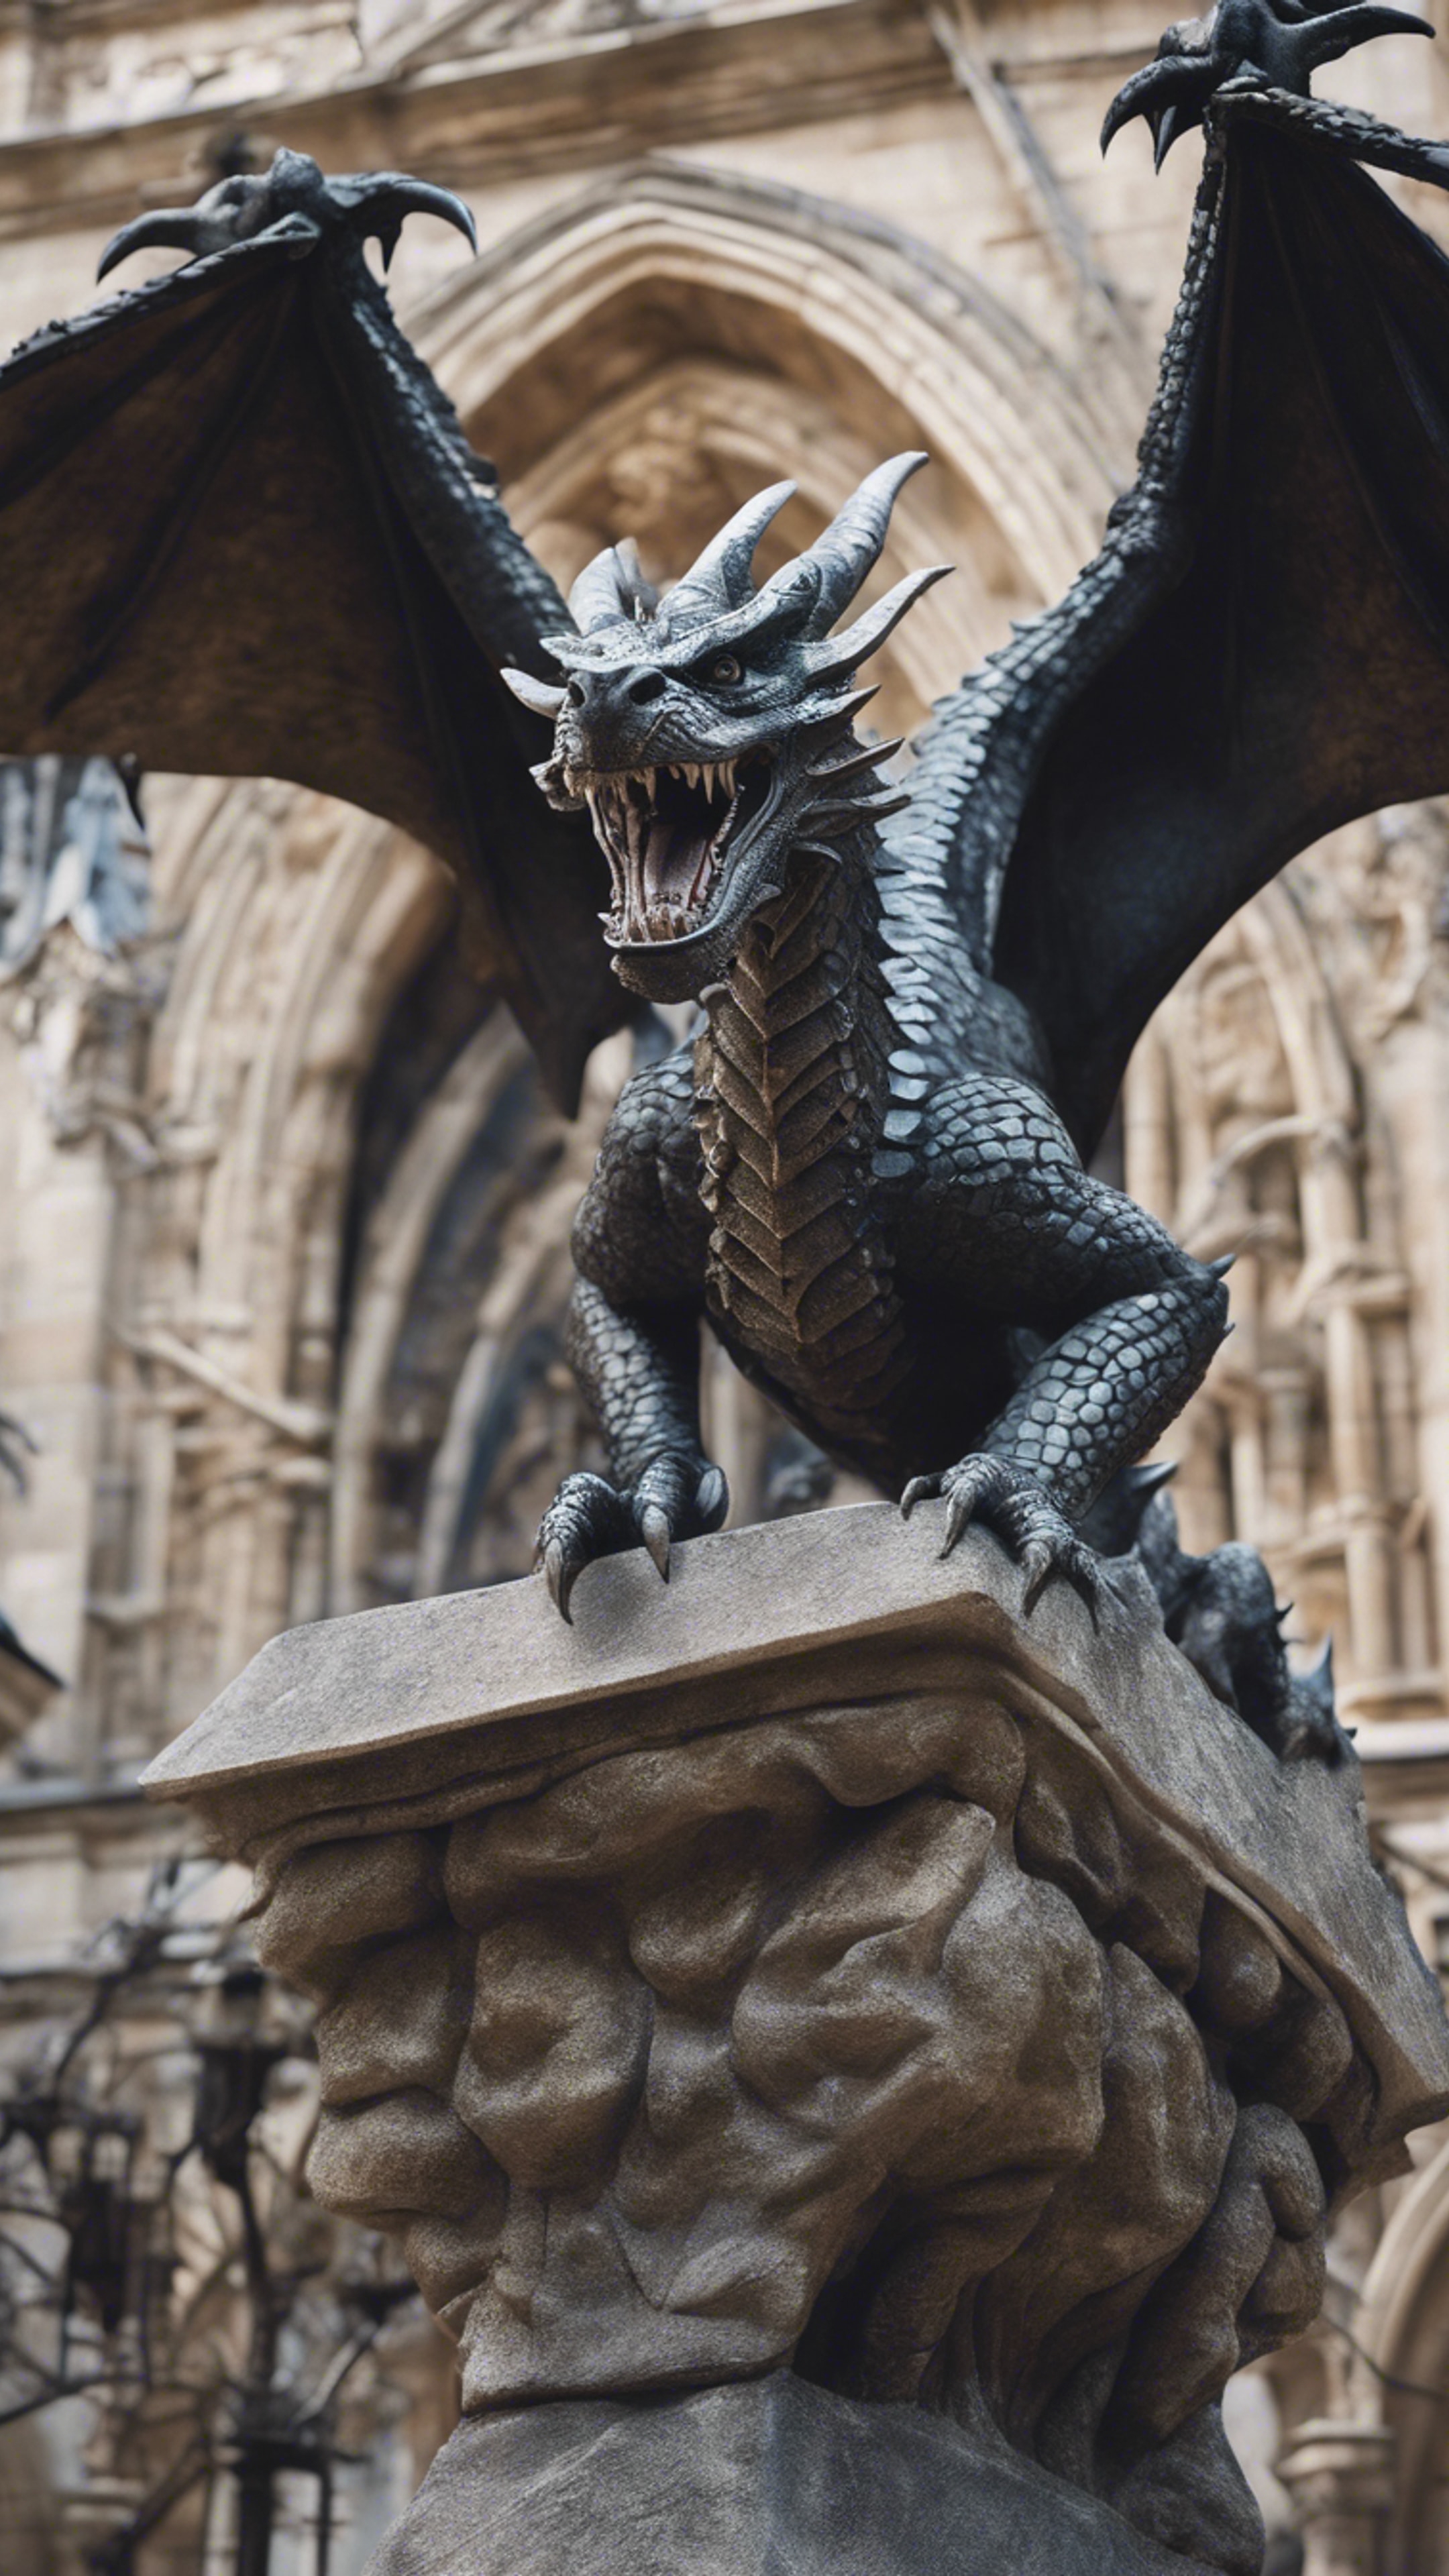 A stone dragon coming to life from the sculpture in a gothic cathedral's courtyard. Divar kağızı[86d9df9db55943e58db6]